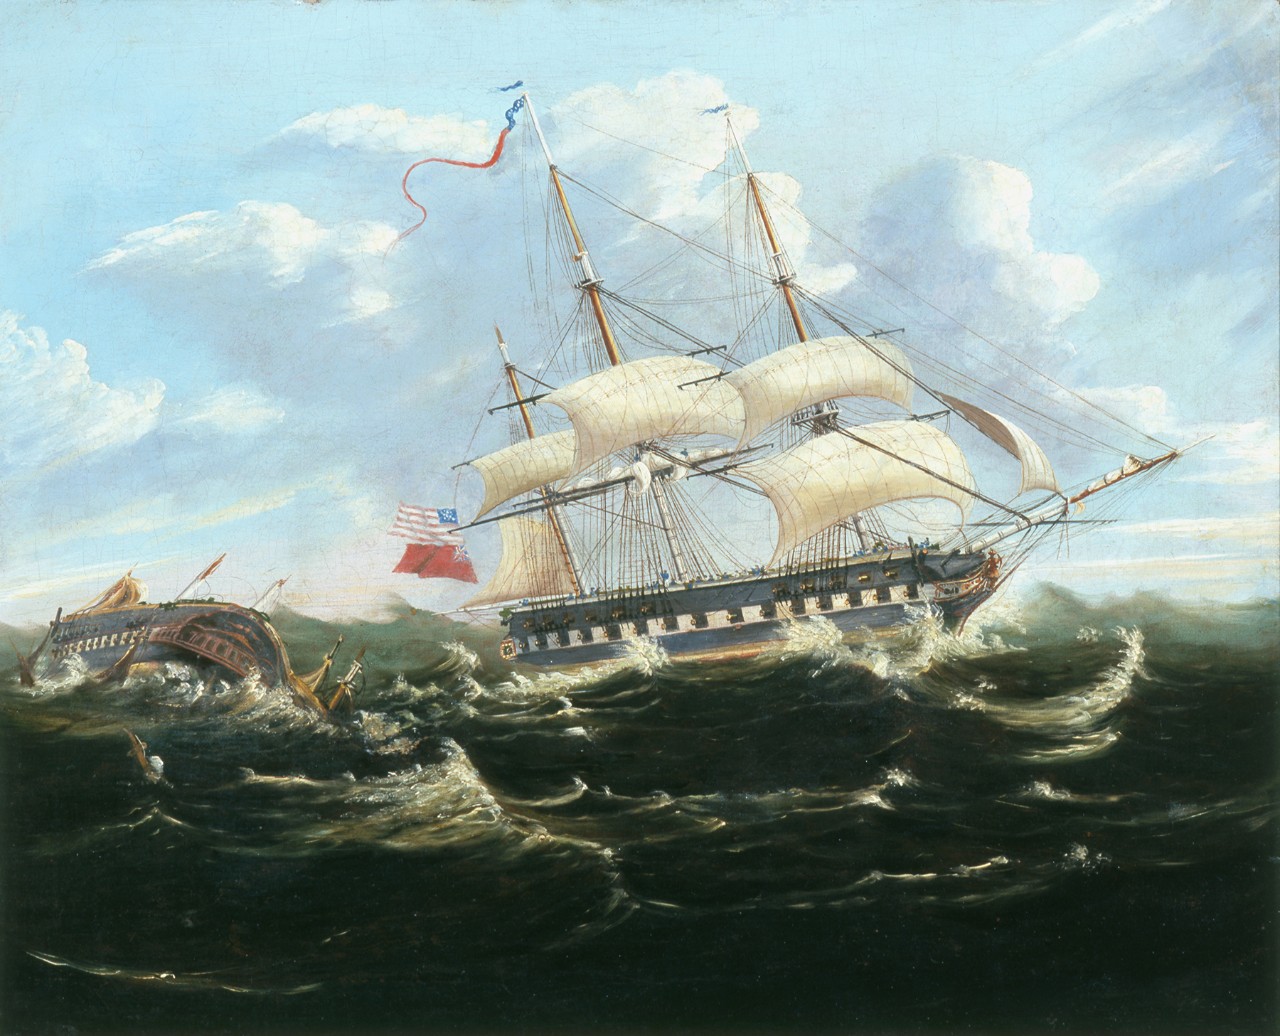 Ships in a battle in rough seas, the British ship on the right is floundering with masts missing, the United States ship on the right is intact